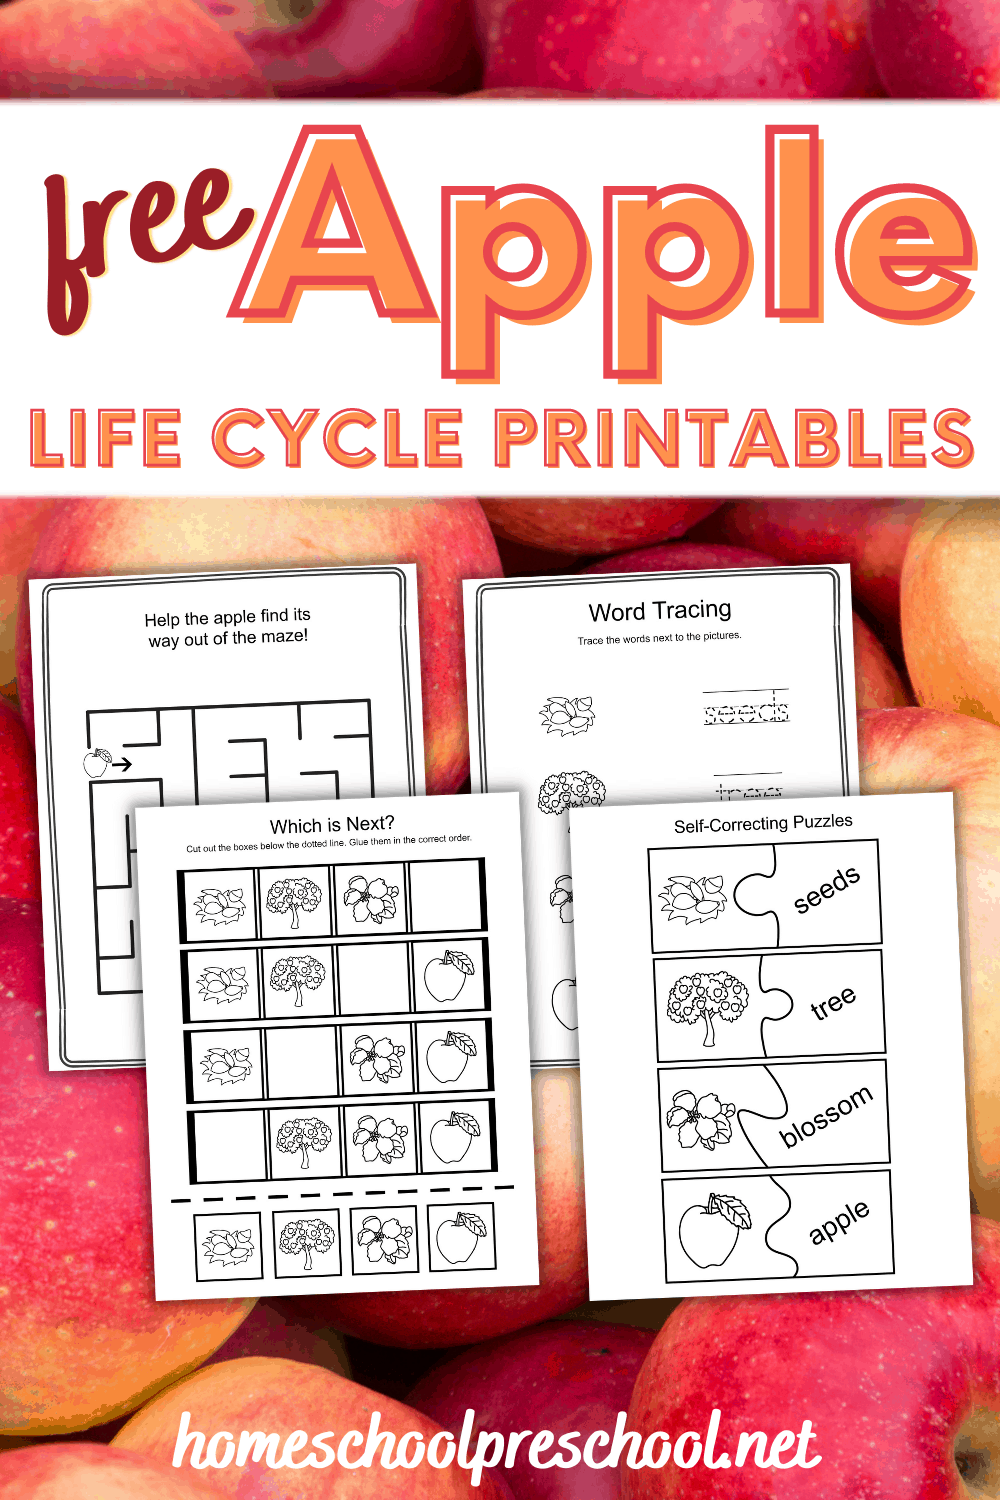 Apple Life Cycle Worksheets